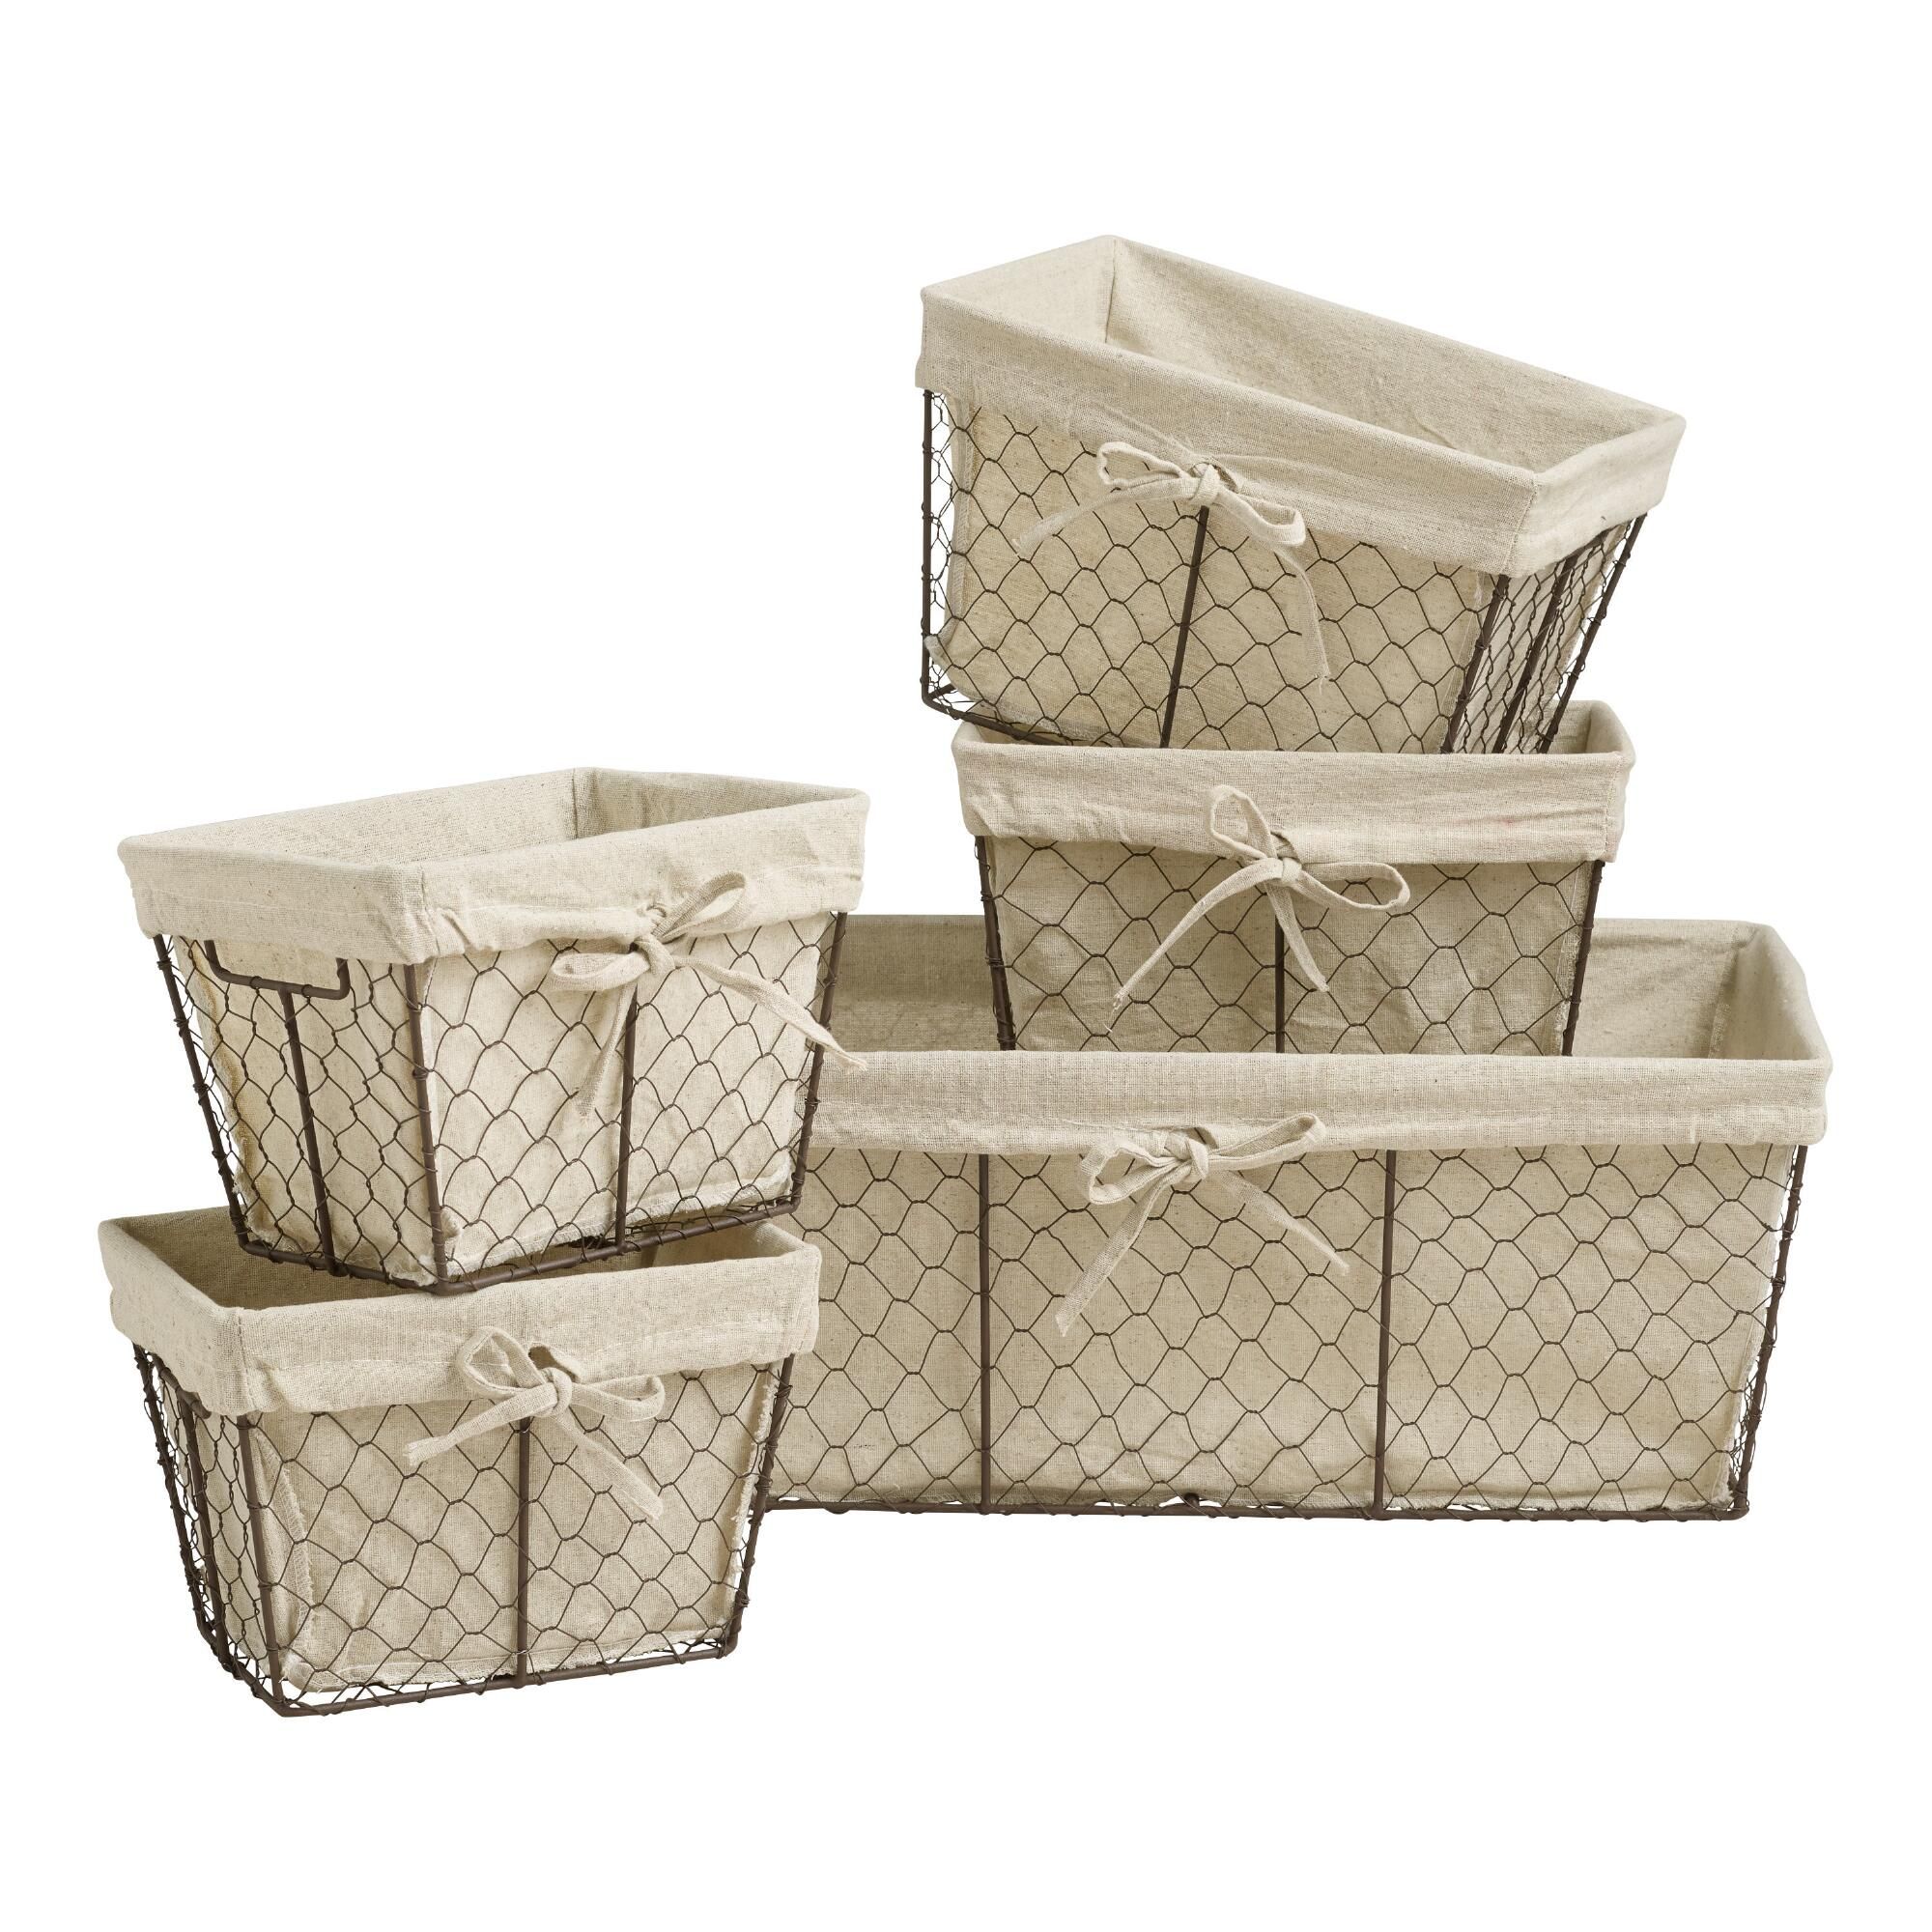 Charlotte Lined Wire Baskets: Natural - Metal - Small by World Market Small | World Market